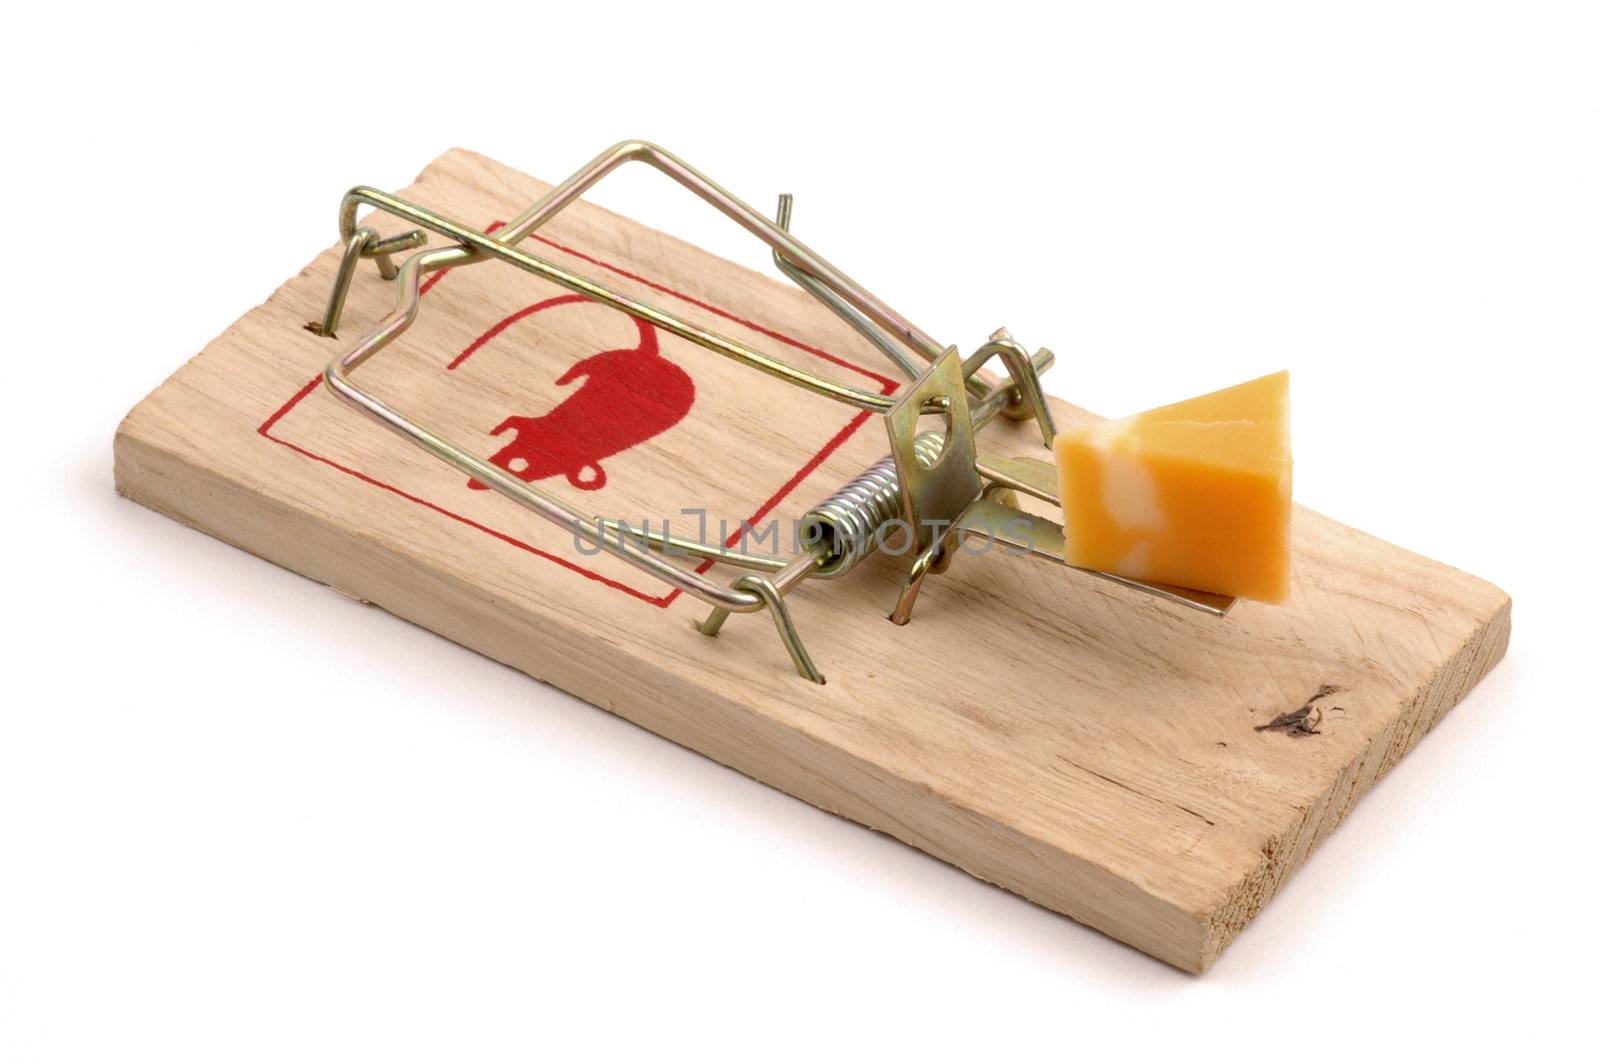 Mousetrap baited with cheese on a white background.